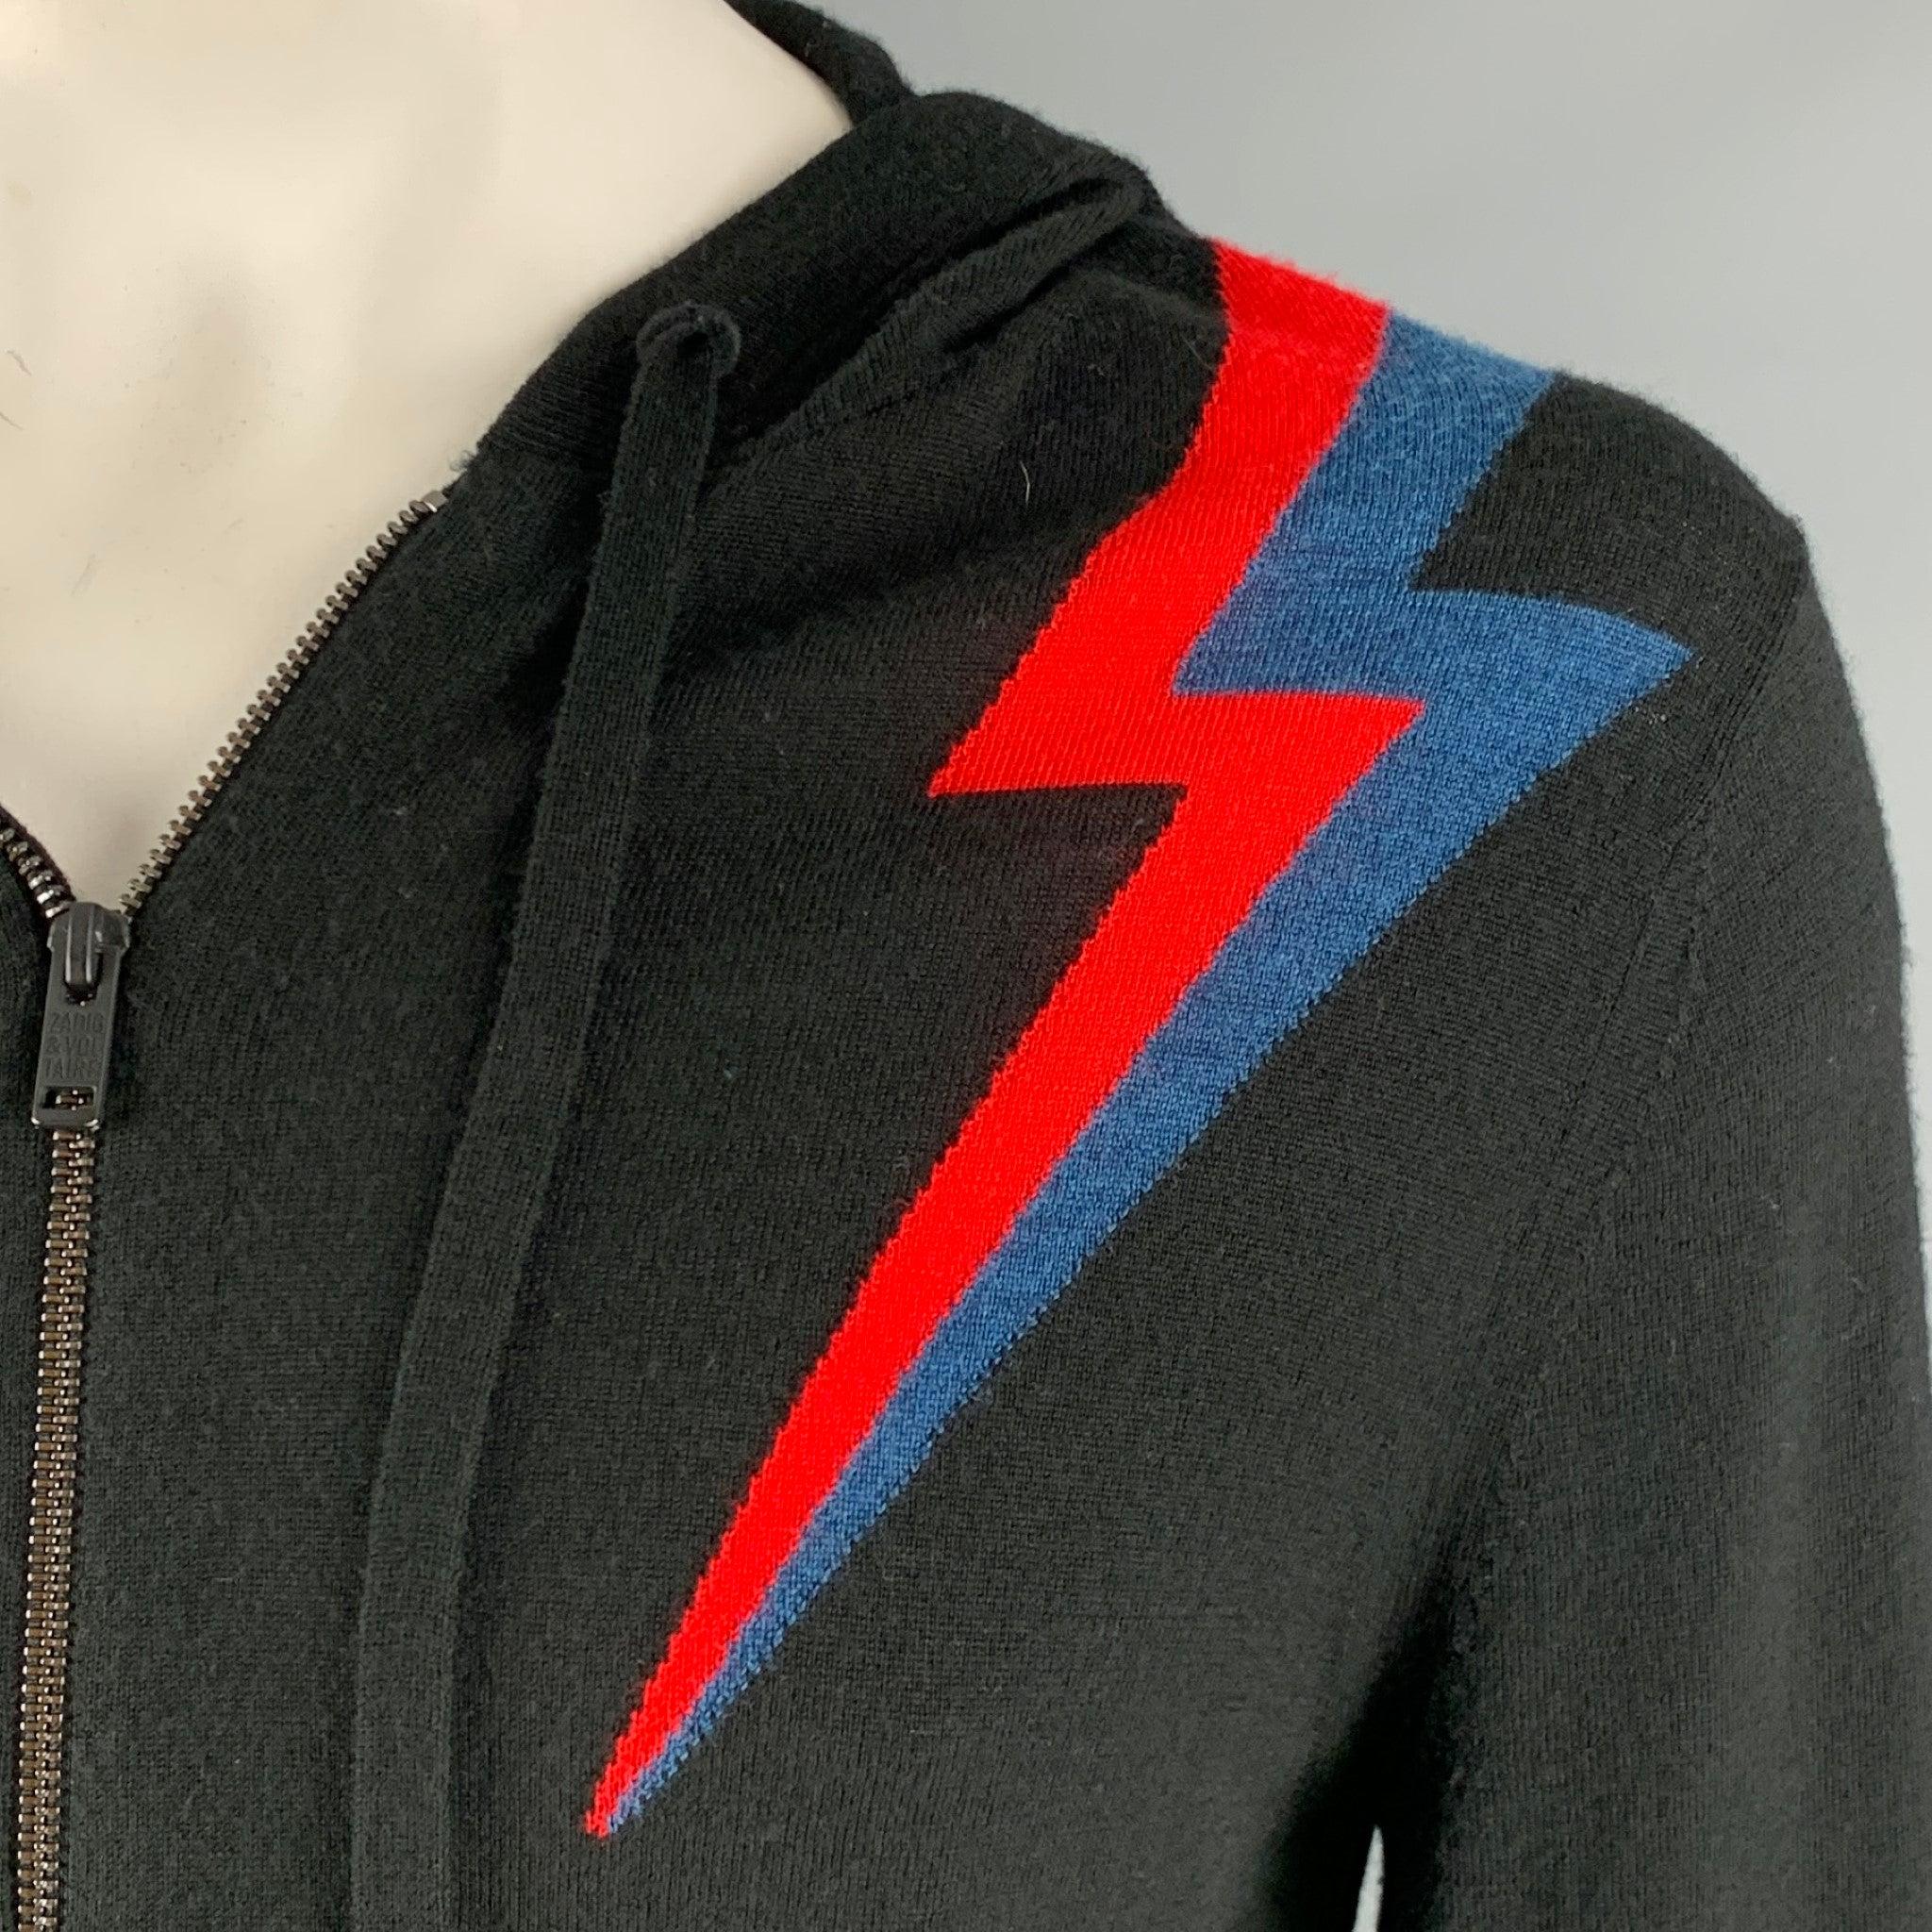 ZADIG & VOLTAIRE hoodie cardigan in a lightweight black merino wool fabric featuring red and blue lightning bolt color block design, and a zip up closure.Very Good Pre-Owned Condition. Moderate signs of wear. 

Marked:   L 

Measurements: 
